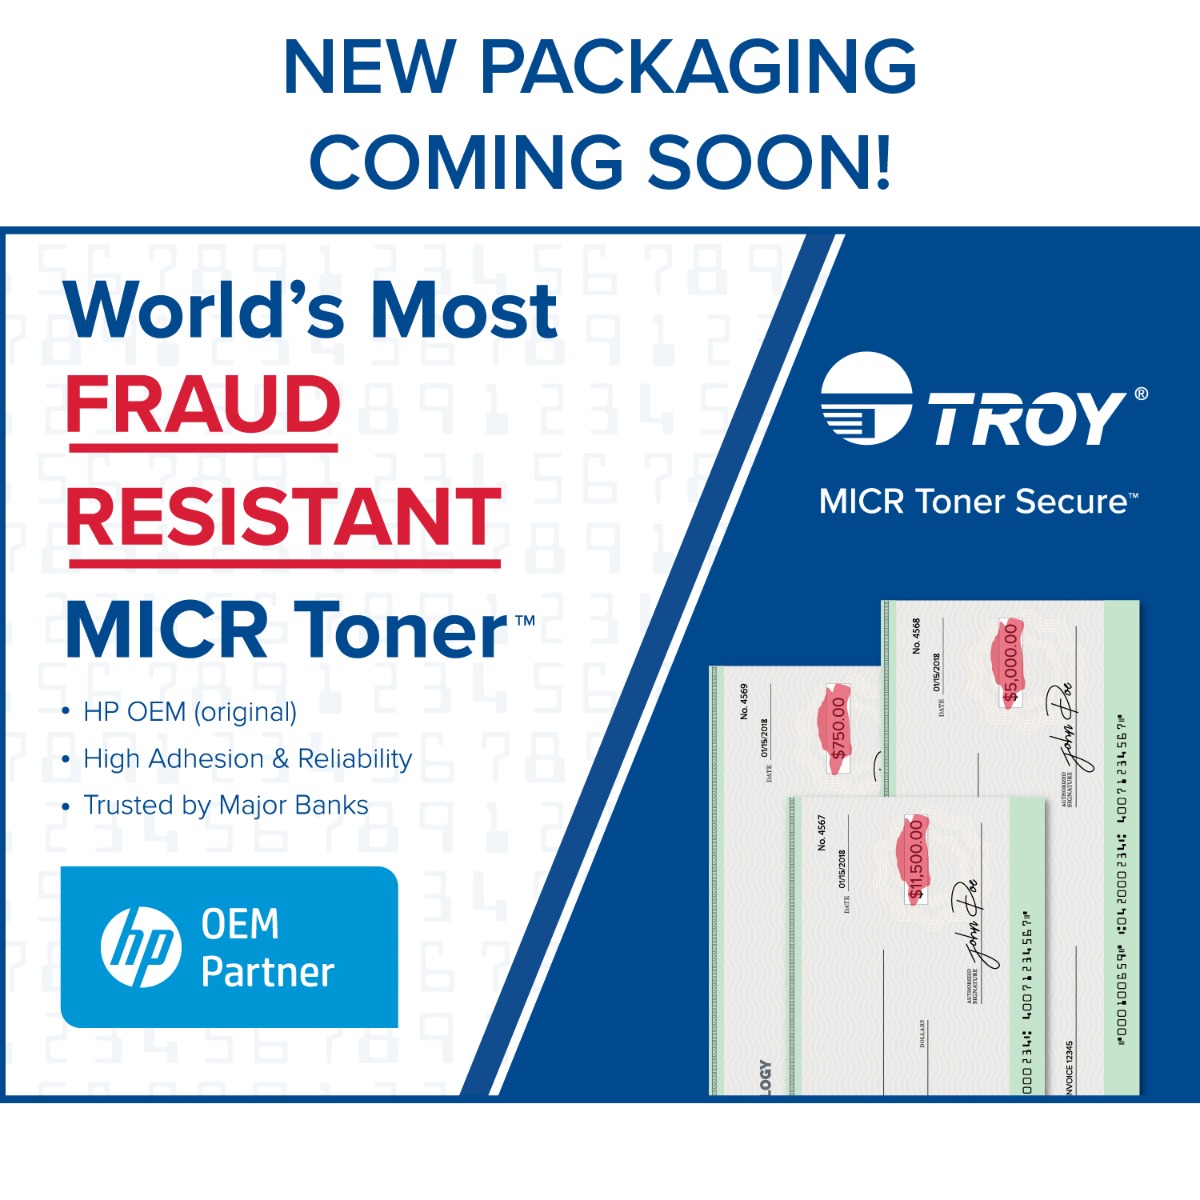 TROY Precision MICR Toner Secure Standard Yield Cartridge for Lexmark T650